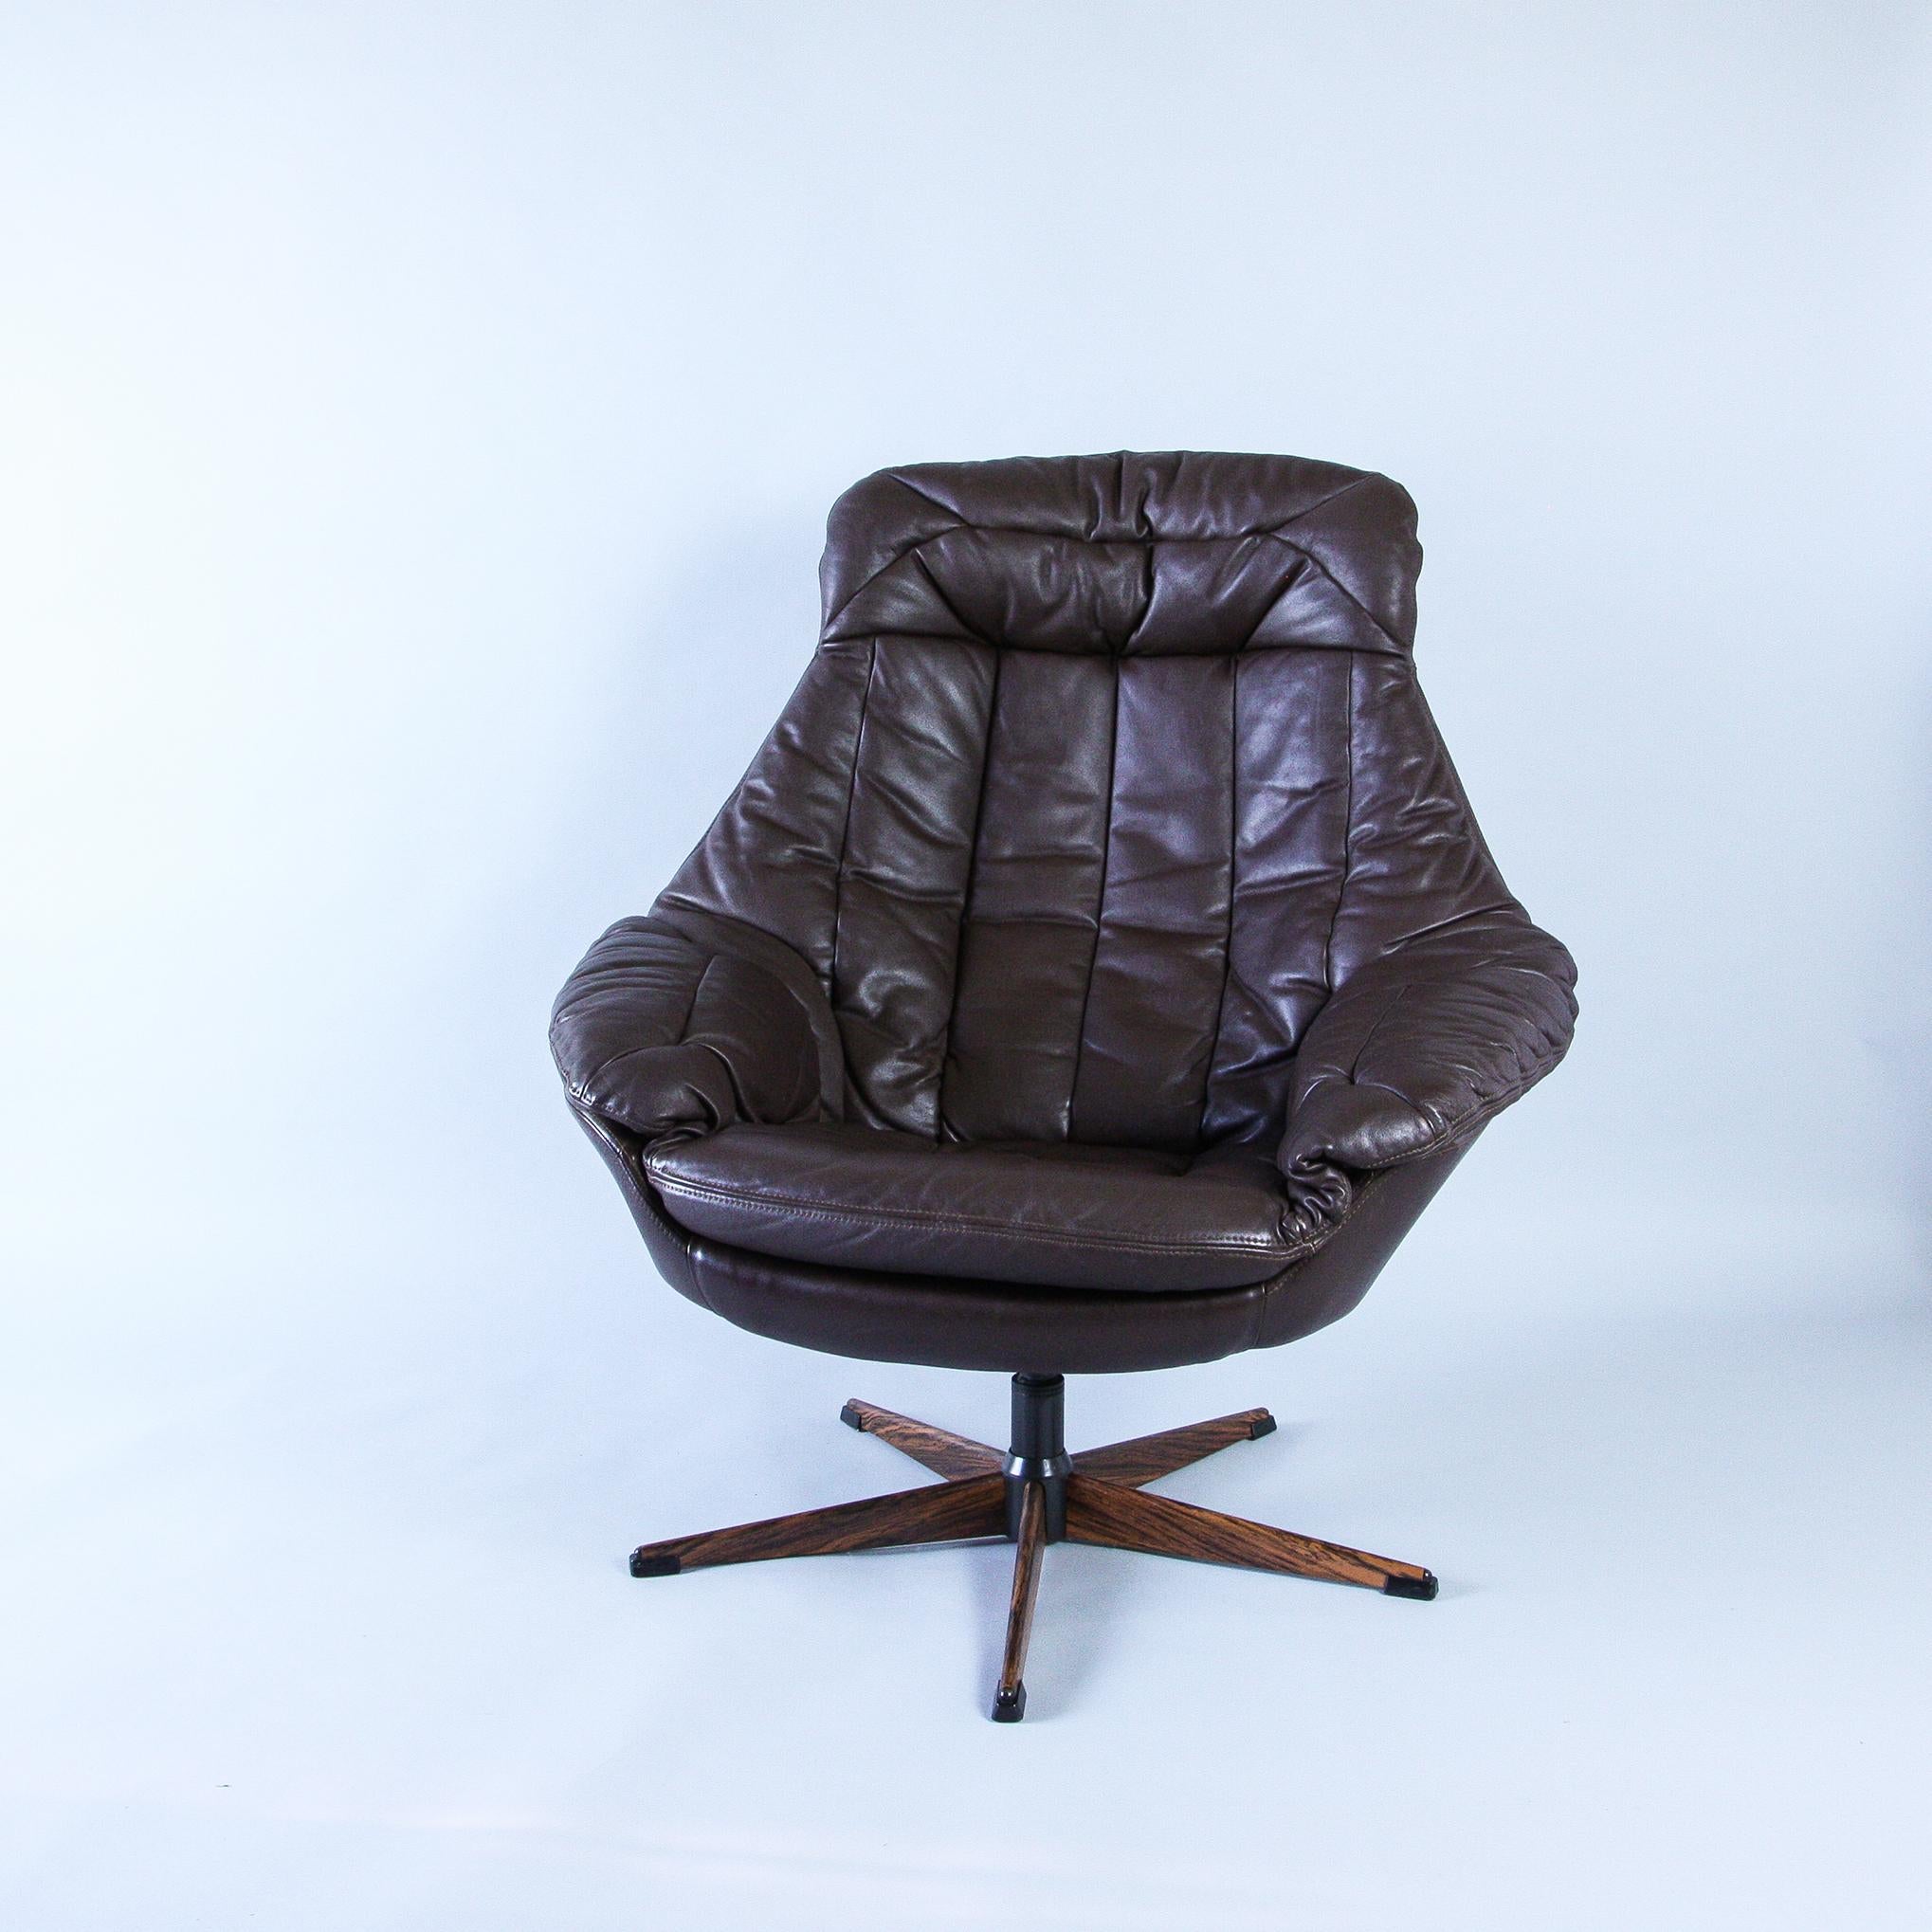 Designed by H.W Klein. Klein trained under Finn Juhl in Denmark and later returned to his native Norway to establish his own furniture business. Manufactured by Bramin Mobler. This chair is in excellent condition. Leather seat, metal feet with